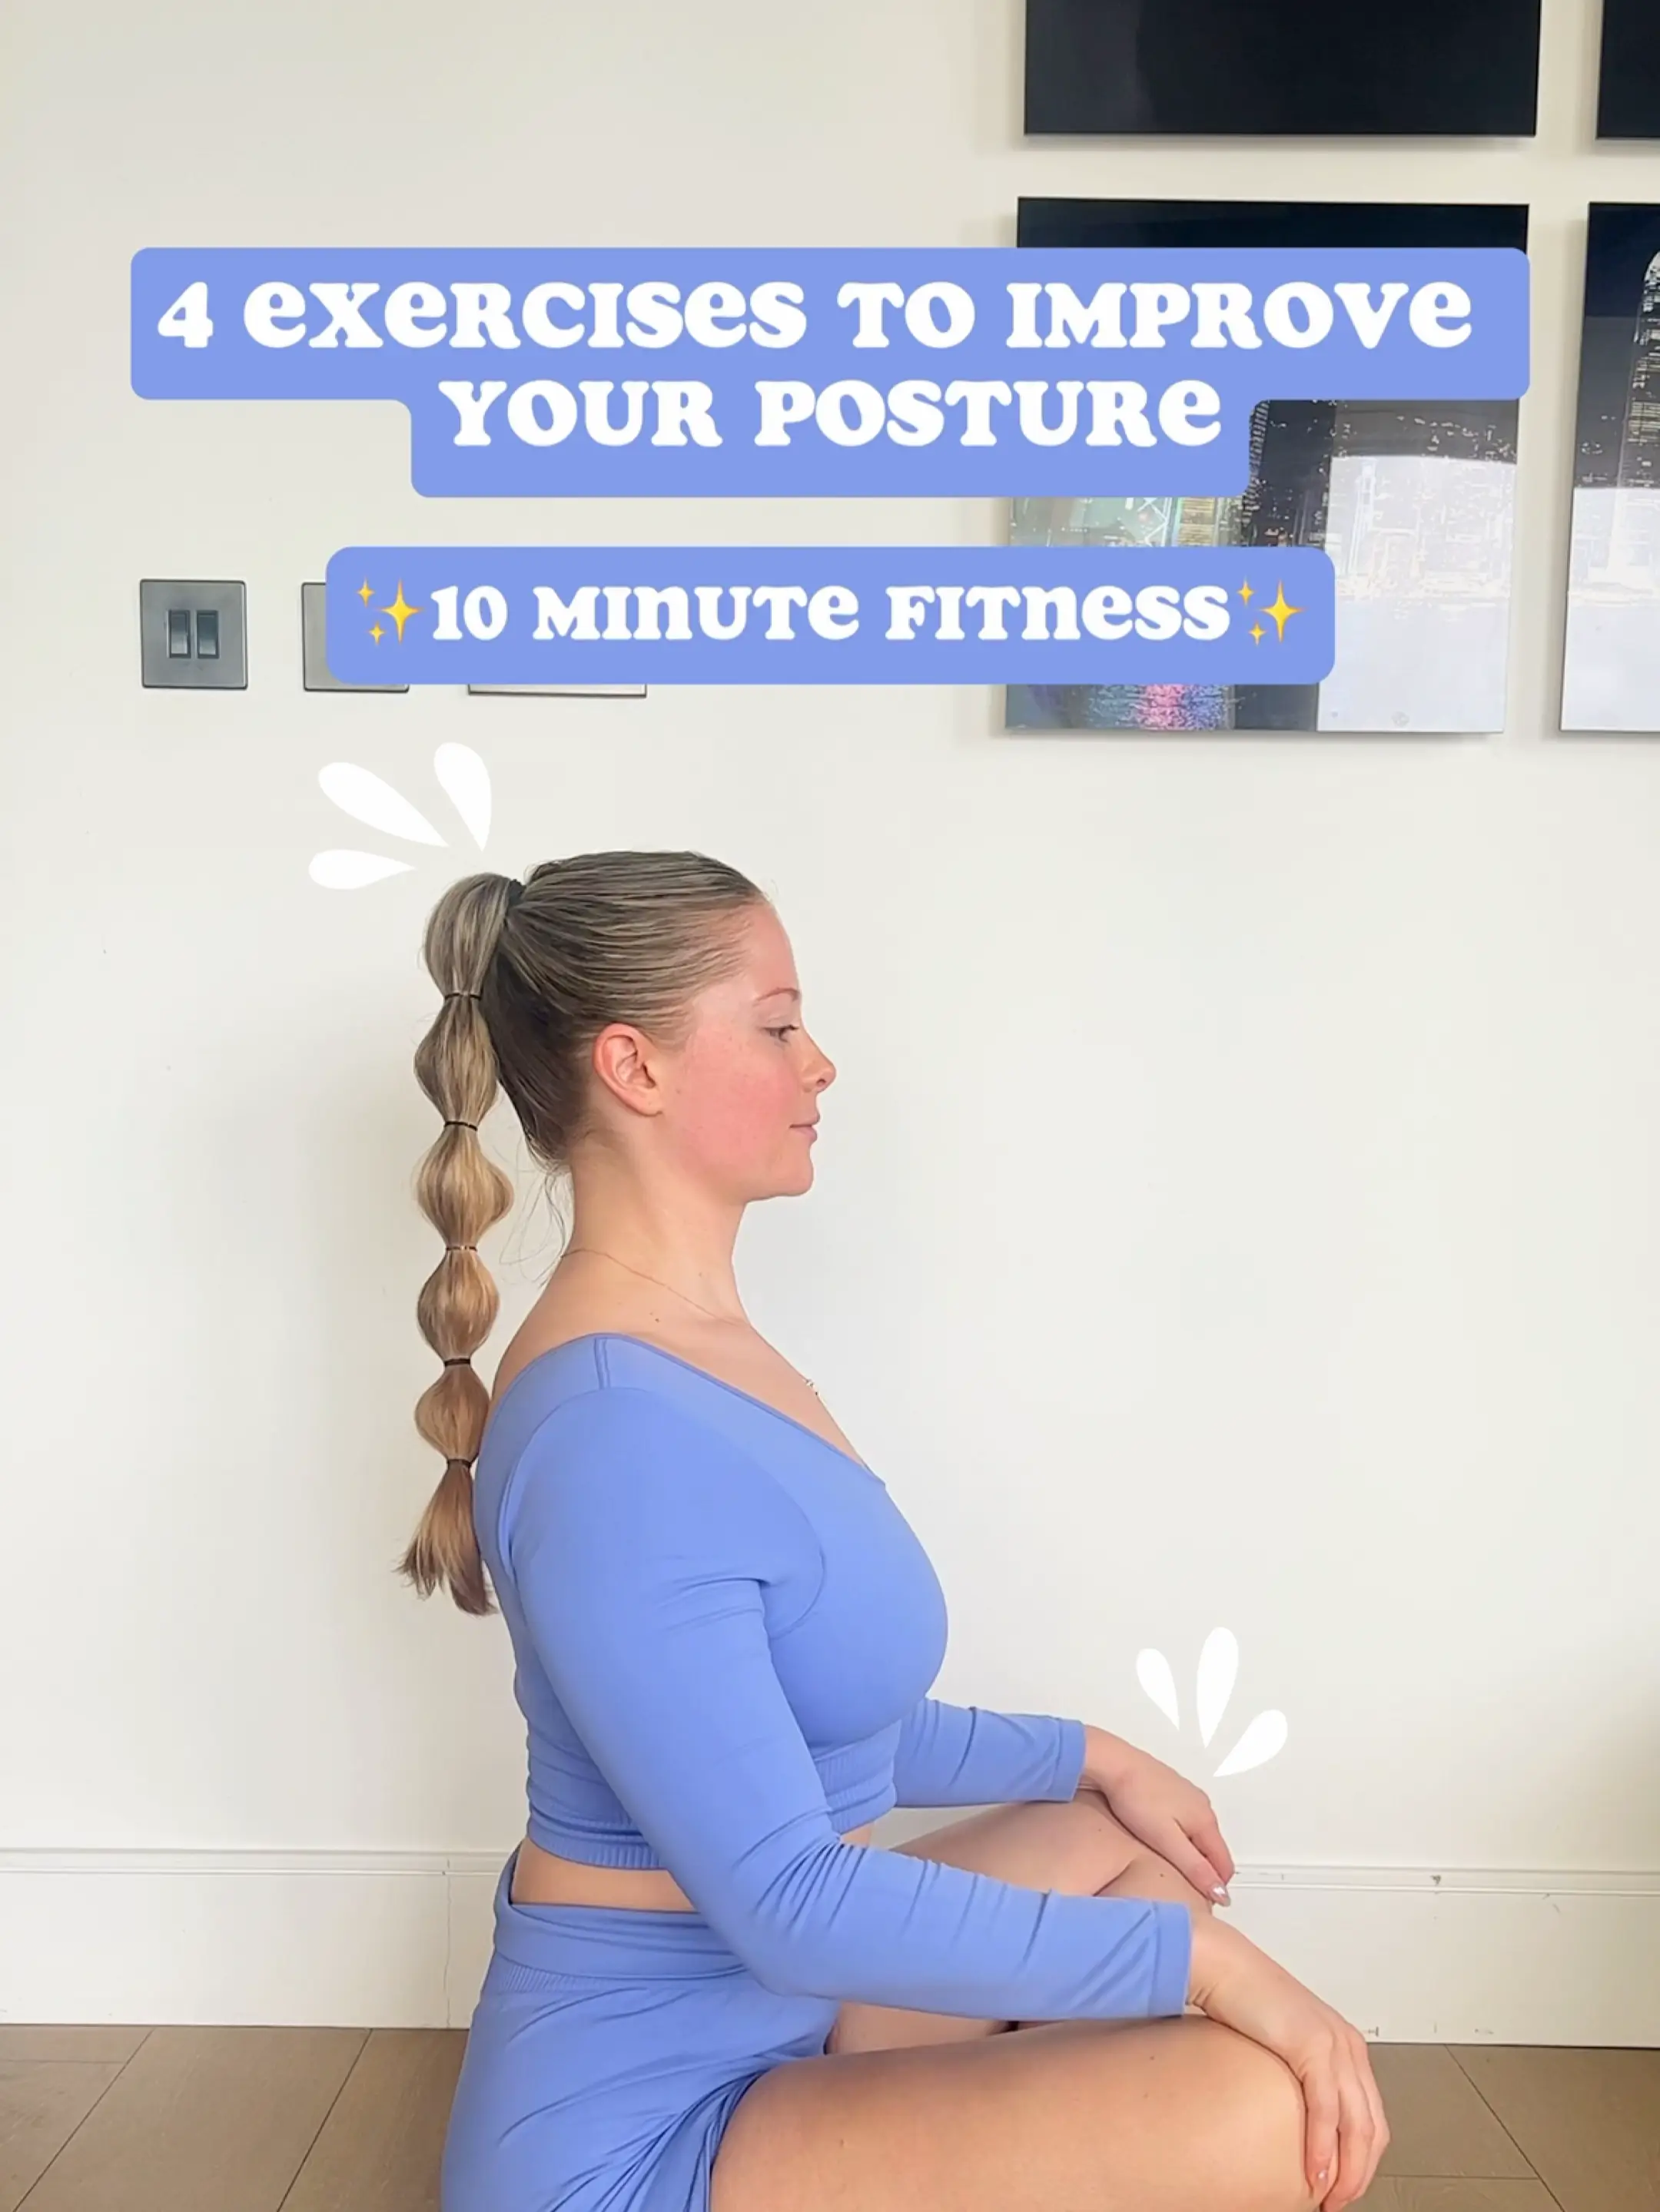 Top Exercises to Improve Your Posture